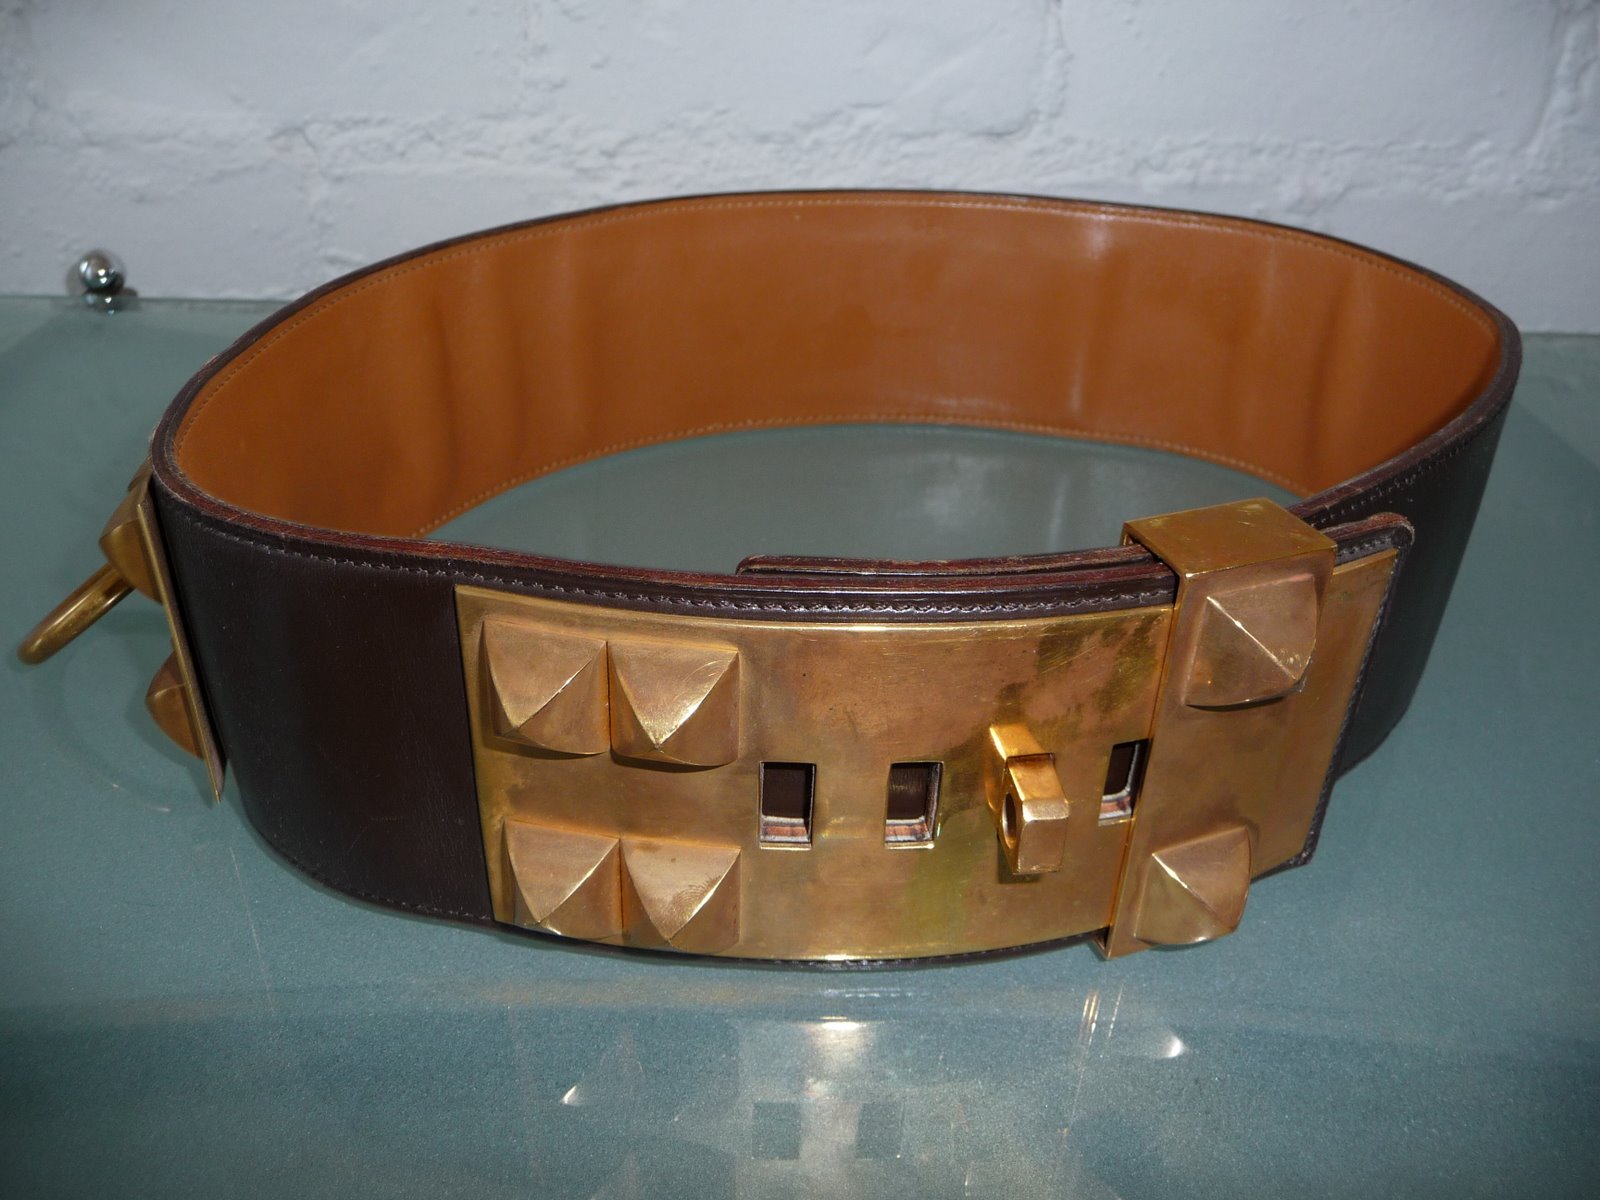 [HERMES+COLLIER+DE+CHIEN+BELT+35+INCHES+E+INCHES+THICK+C+1960S.JPG]